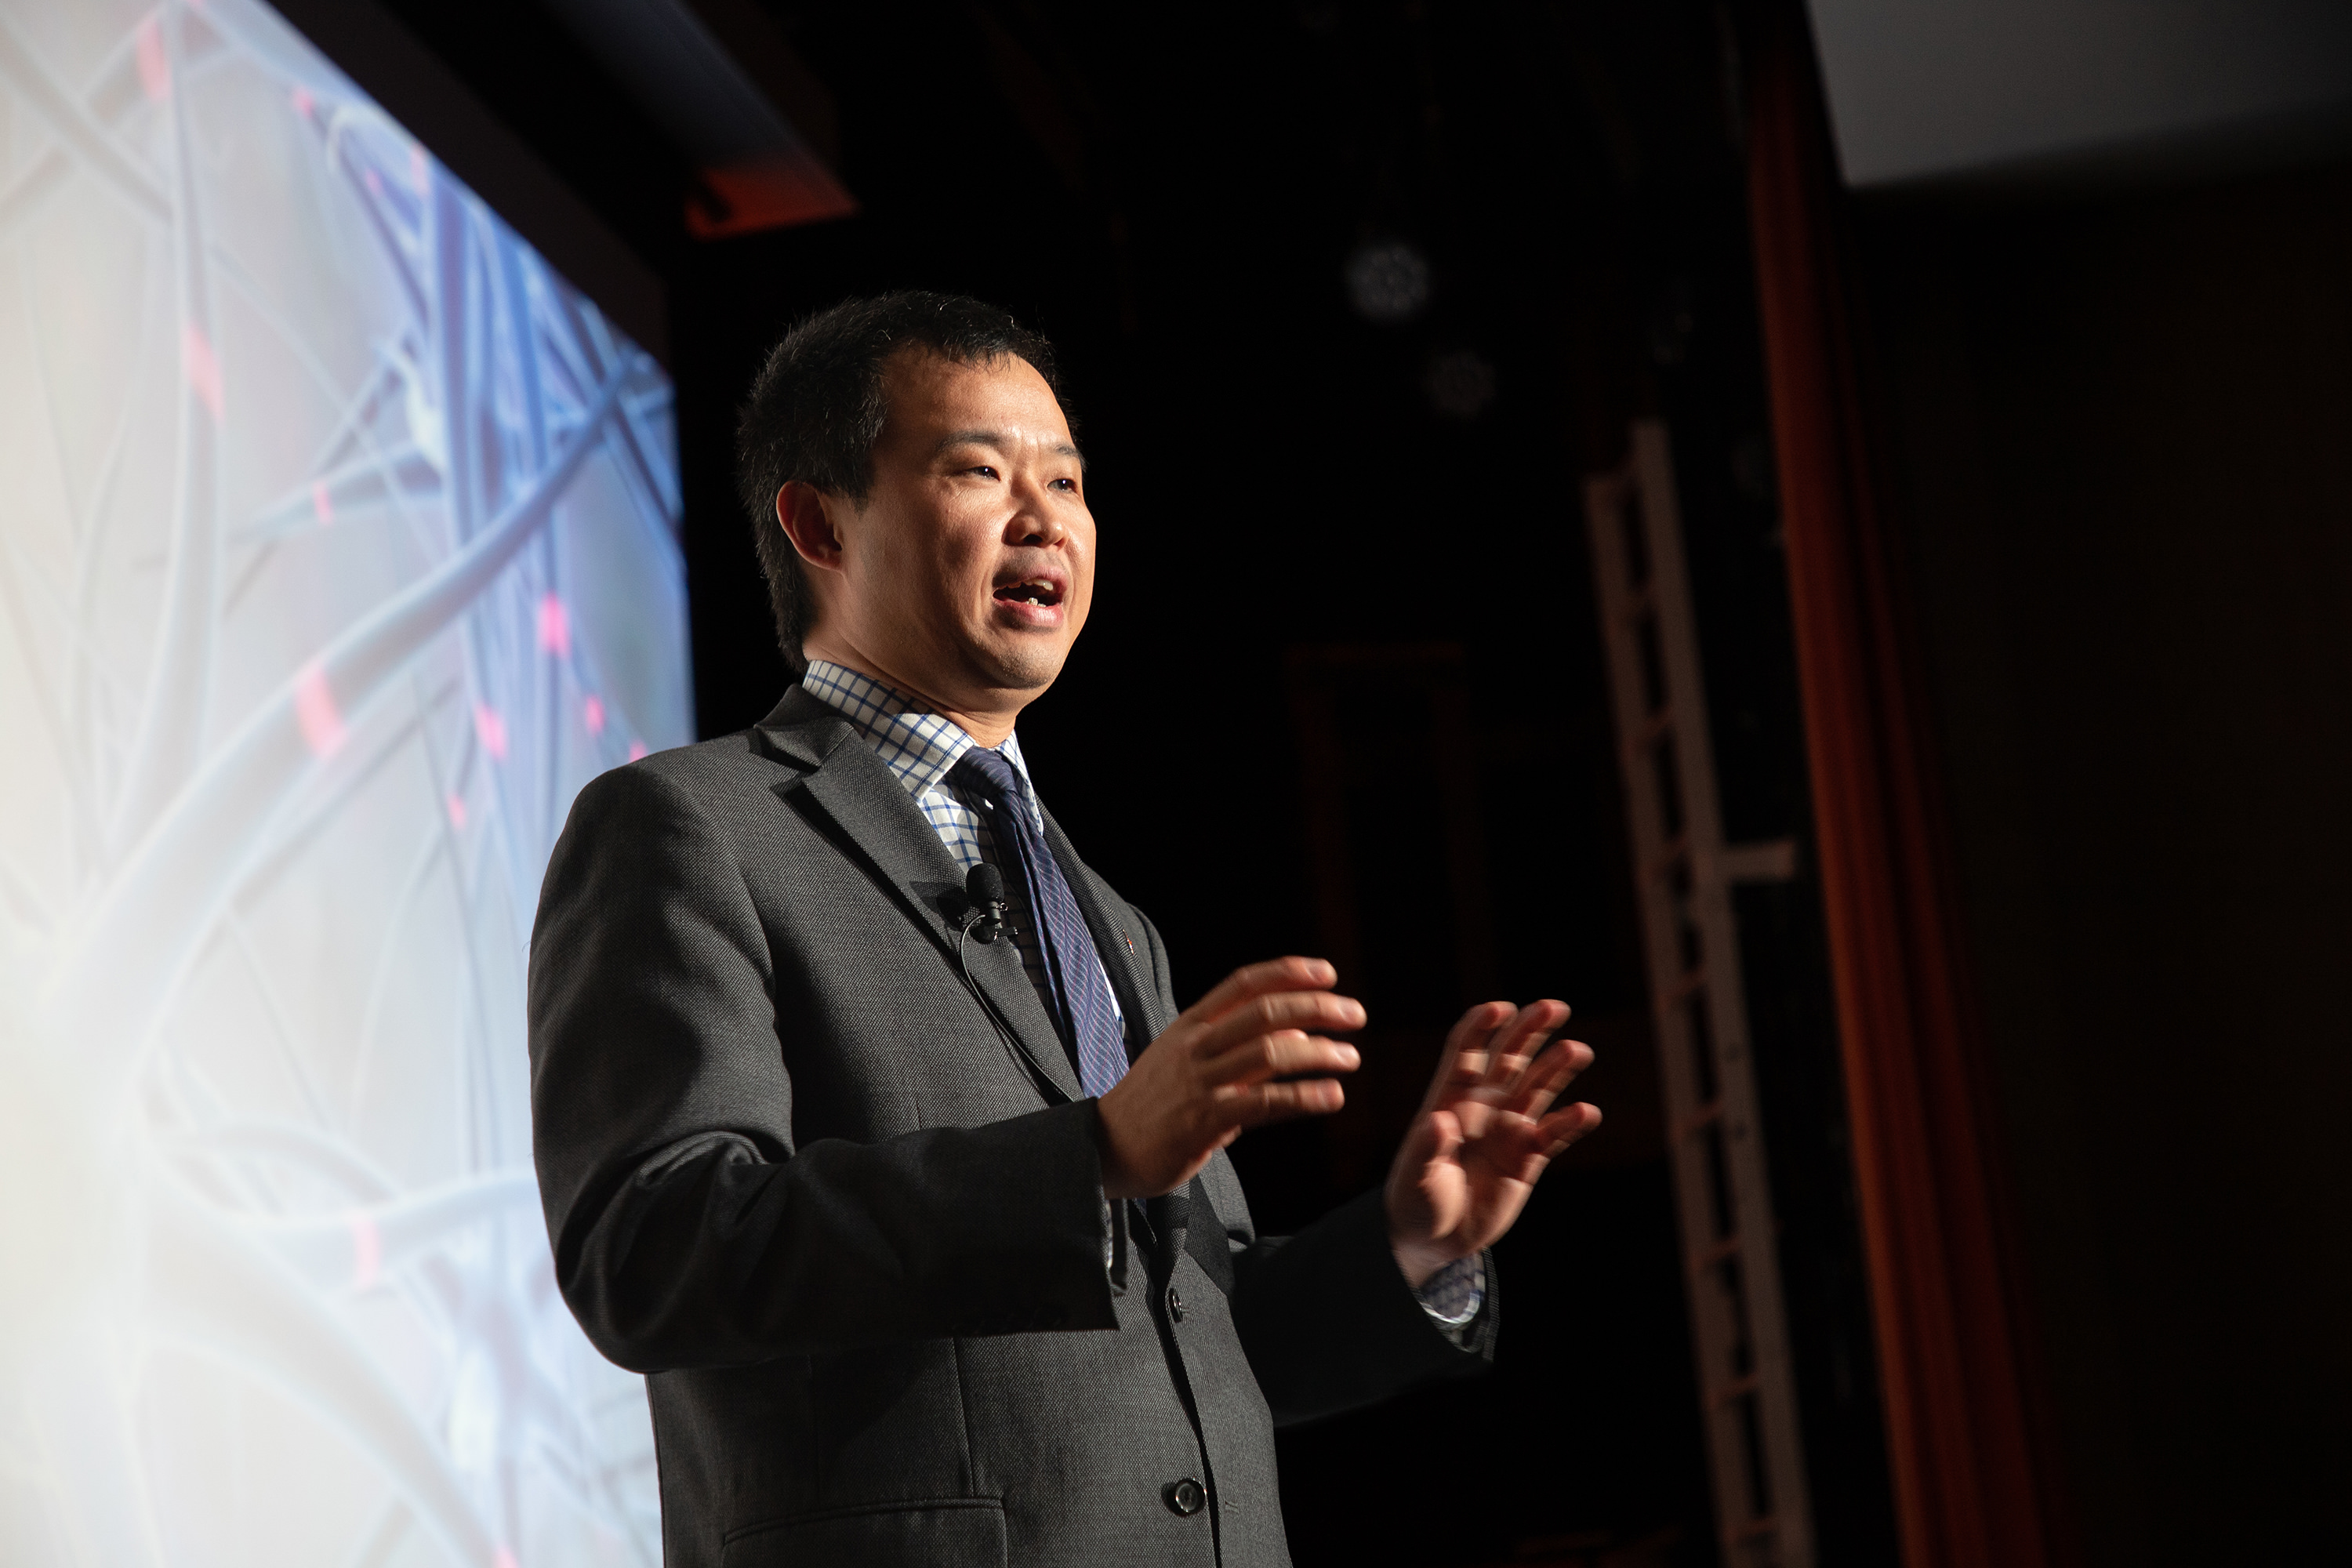 Dr. Junfeng Jiao presents at the spring 2023 Herbert Family University Lecture Series